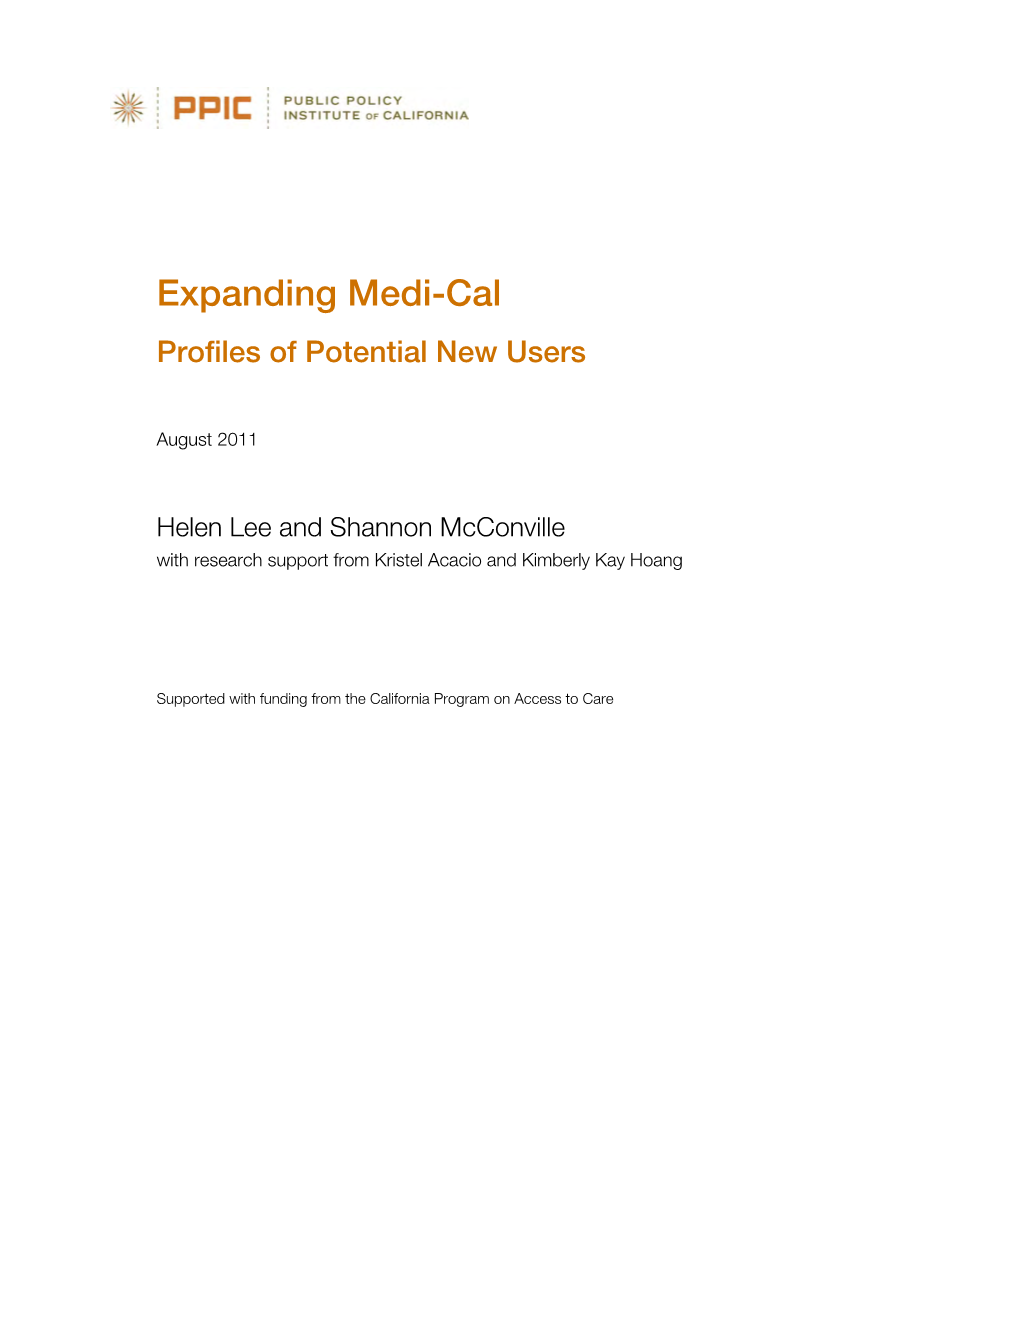 Expanding Medi-Cal Profiles of Potential New Users